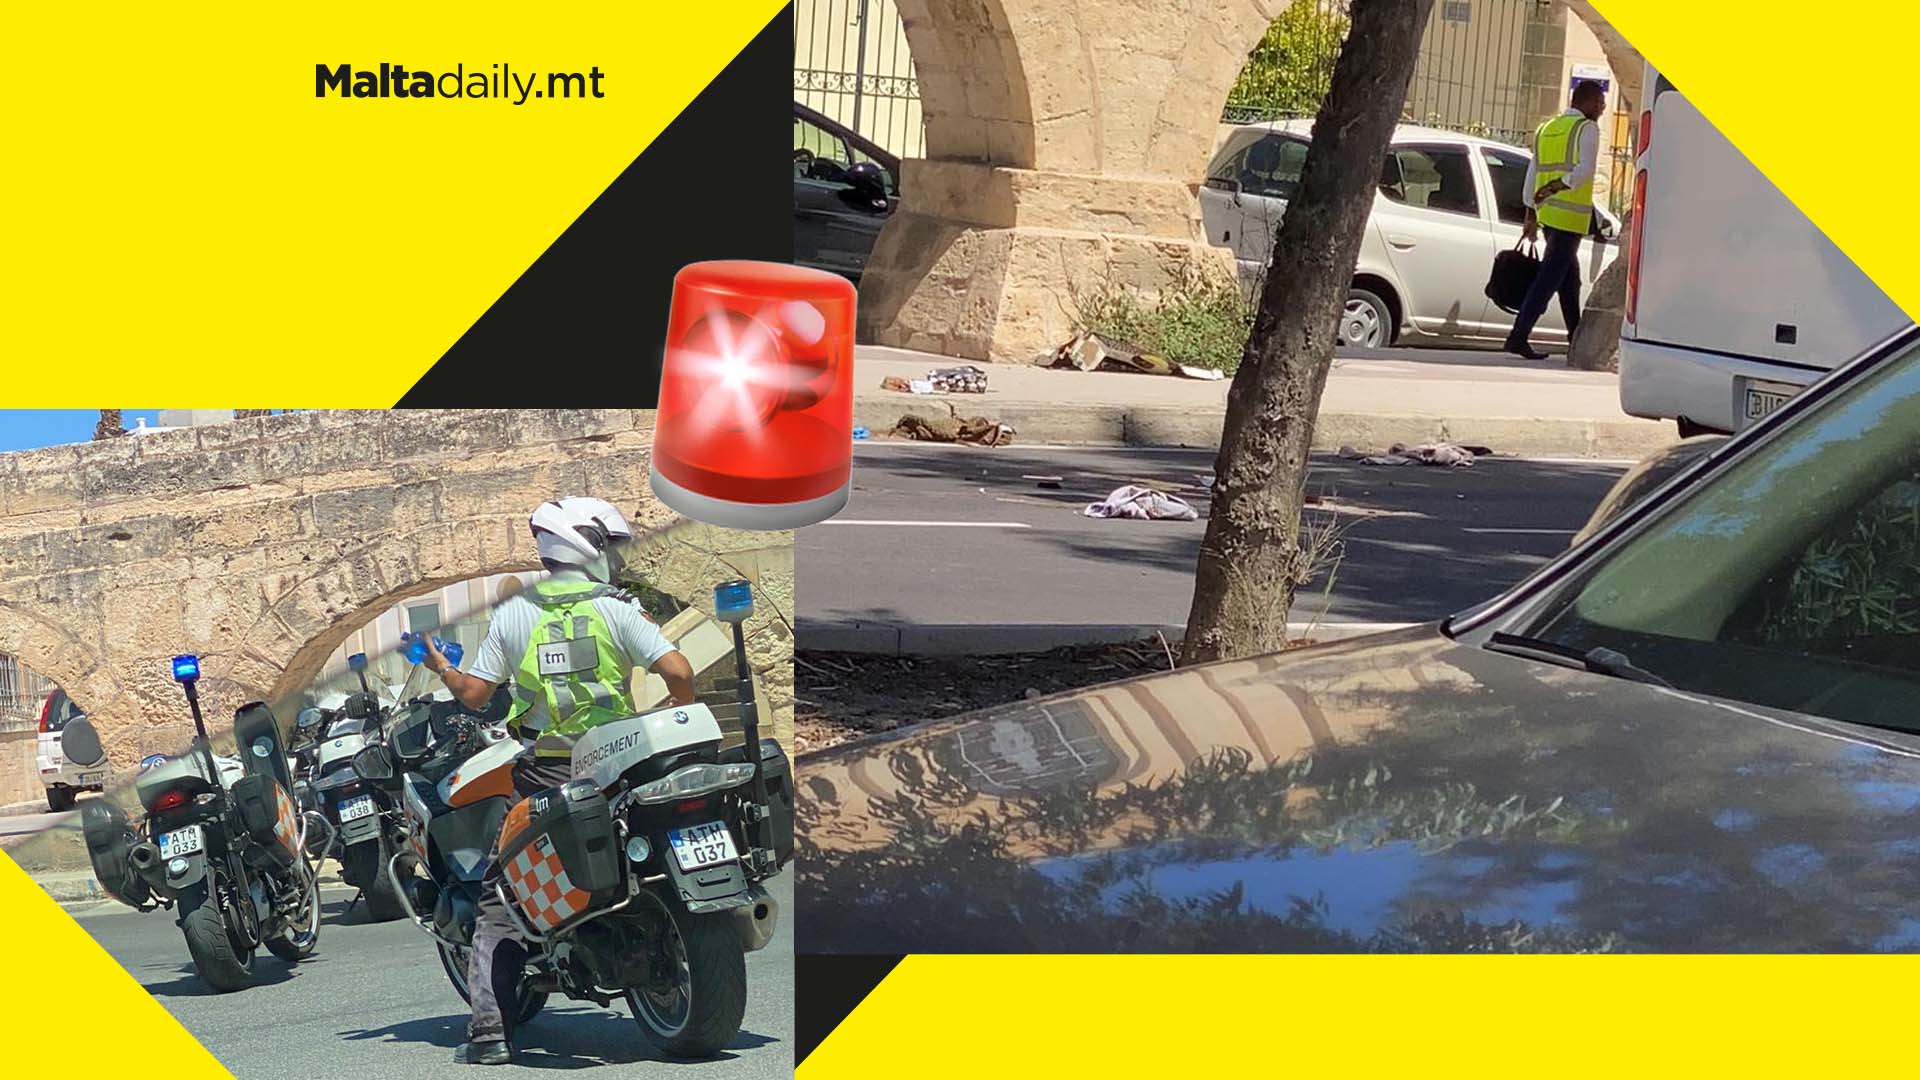 Person reportedly run over in Mriehel bypass